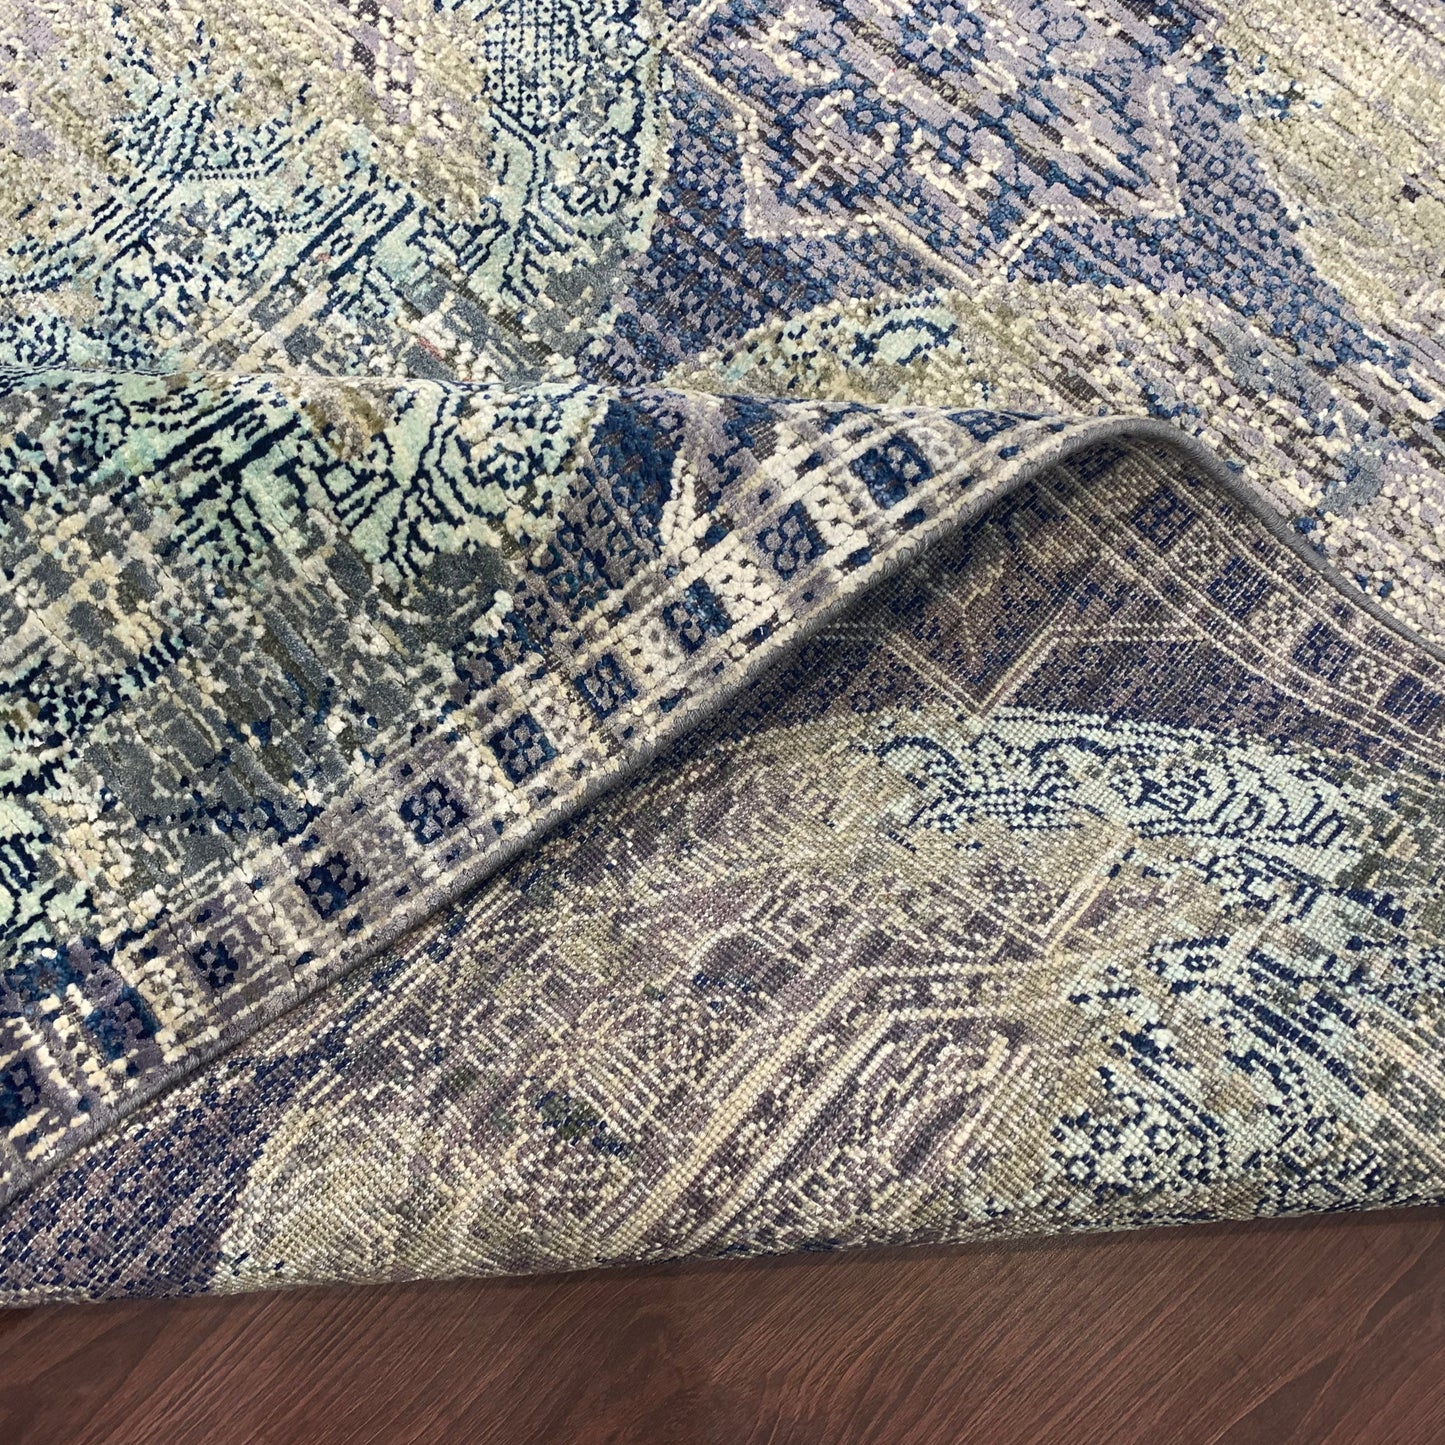 Get trendy with Blue Multi Silk, Wool Modern Area Rug 4.10x7.4ft 147x222Cms - Modern Rugs available at Jaipur Oriental Rugs. Grab yours for $1825.00 today!